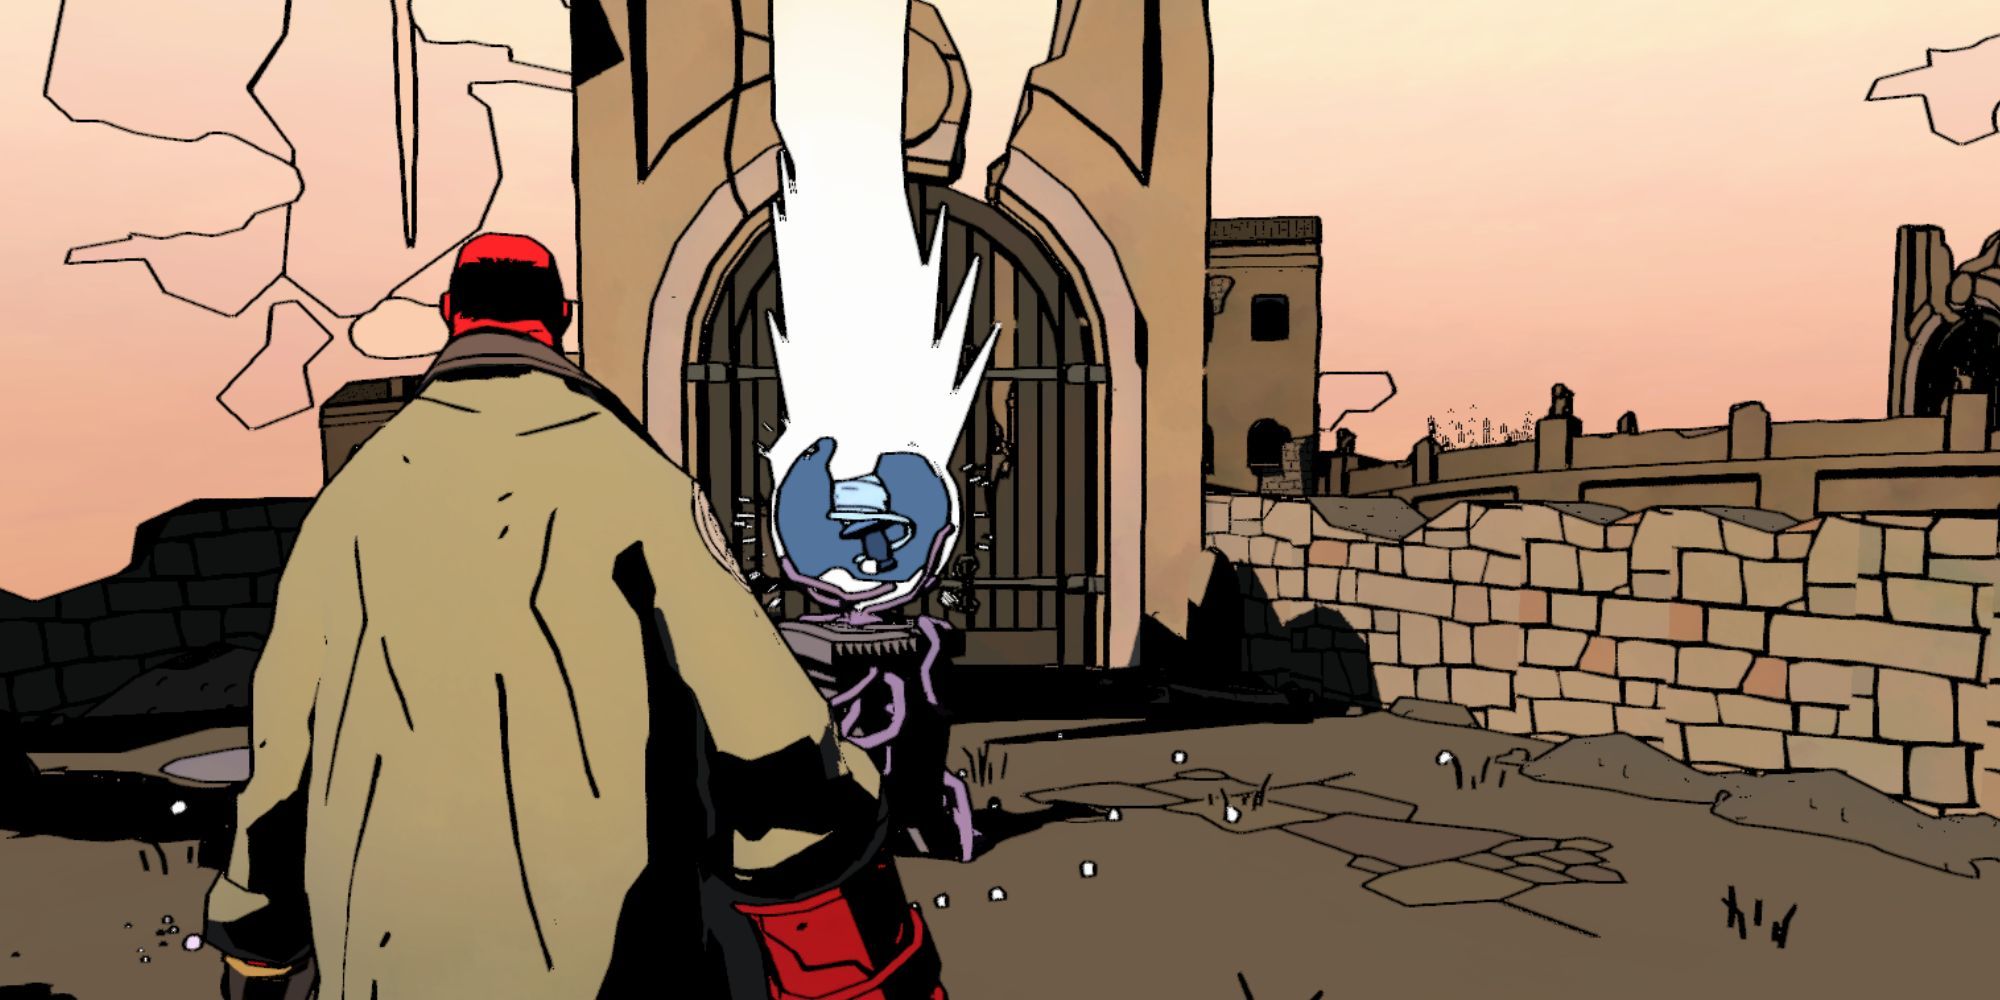 Hellboy looking at a Blessing in Web of Wyrd.